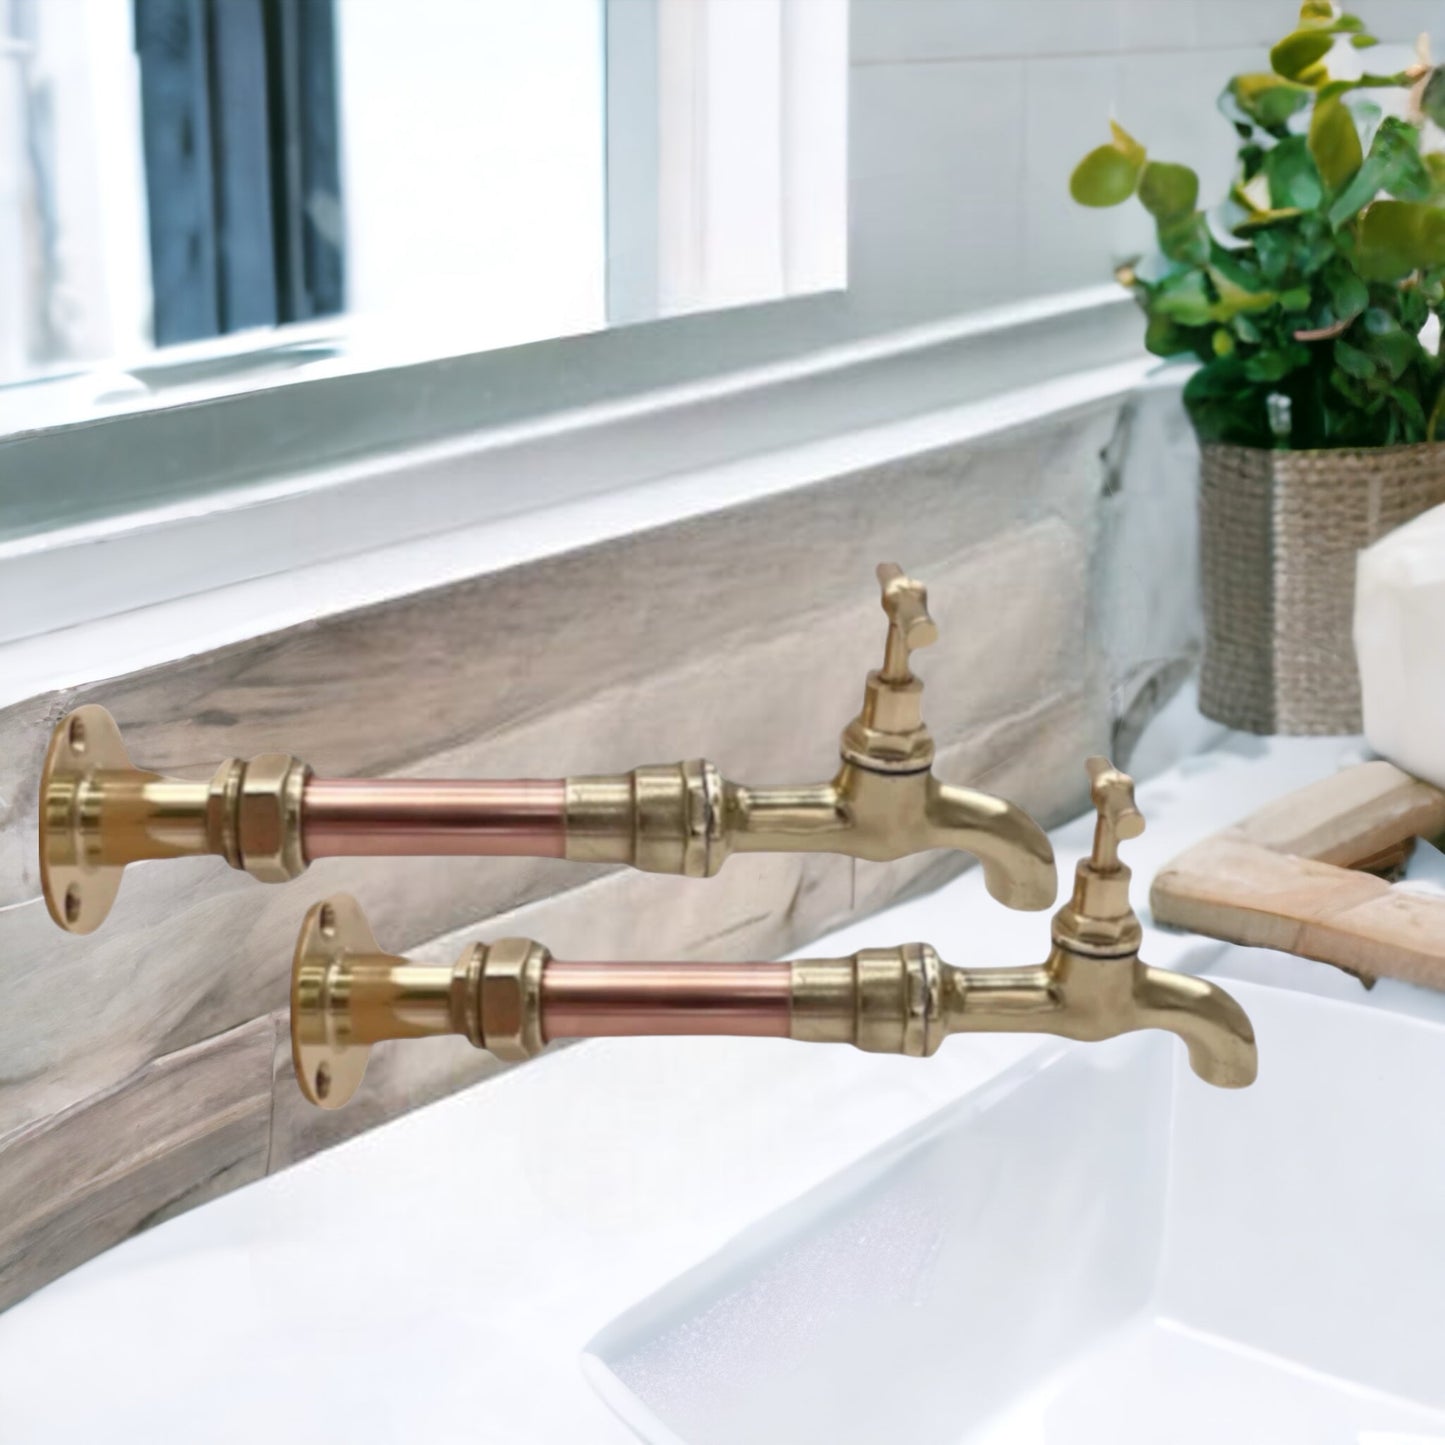 Vintage Style Brass and Copper Kitchen Taps, Bathroom Taps, ideal for Belfast Sink (T47)